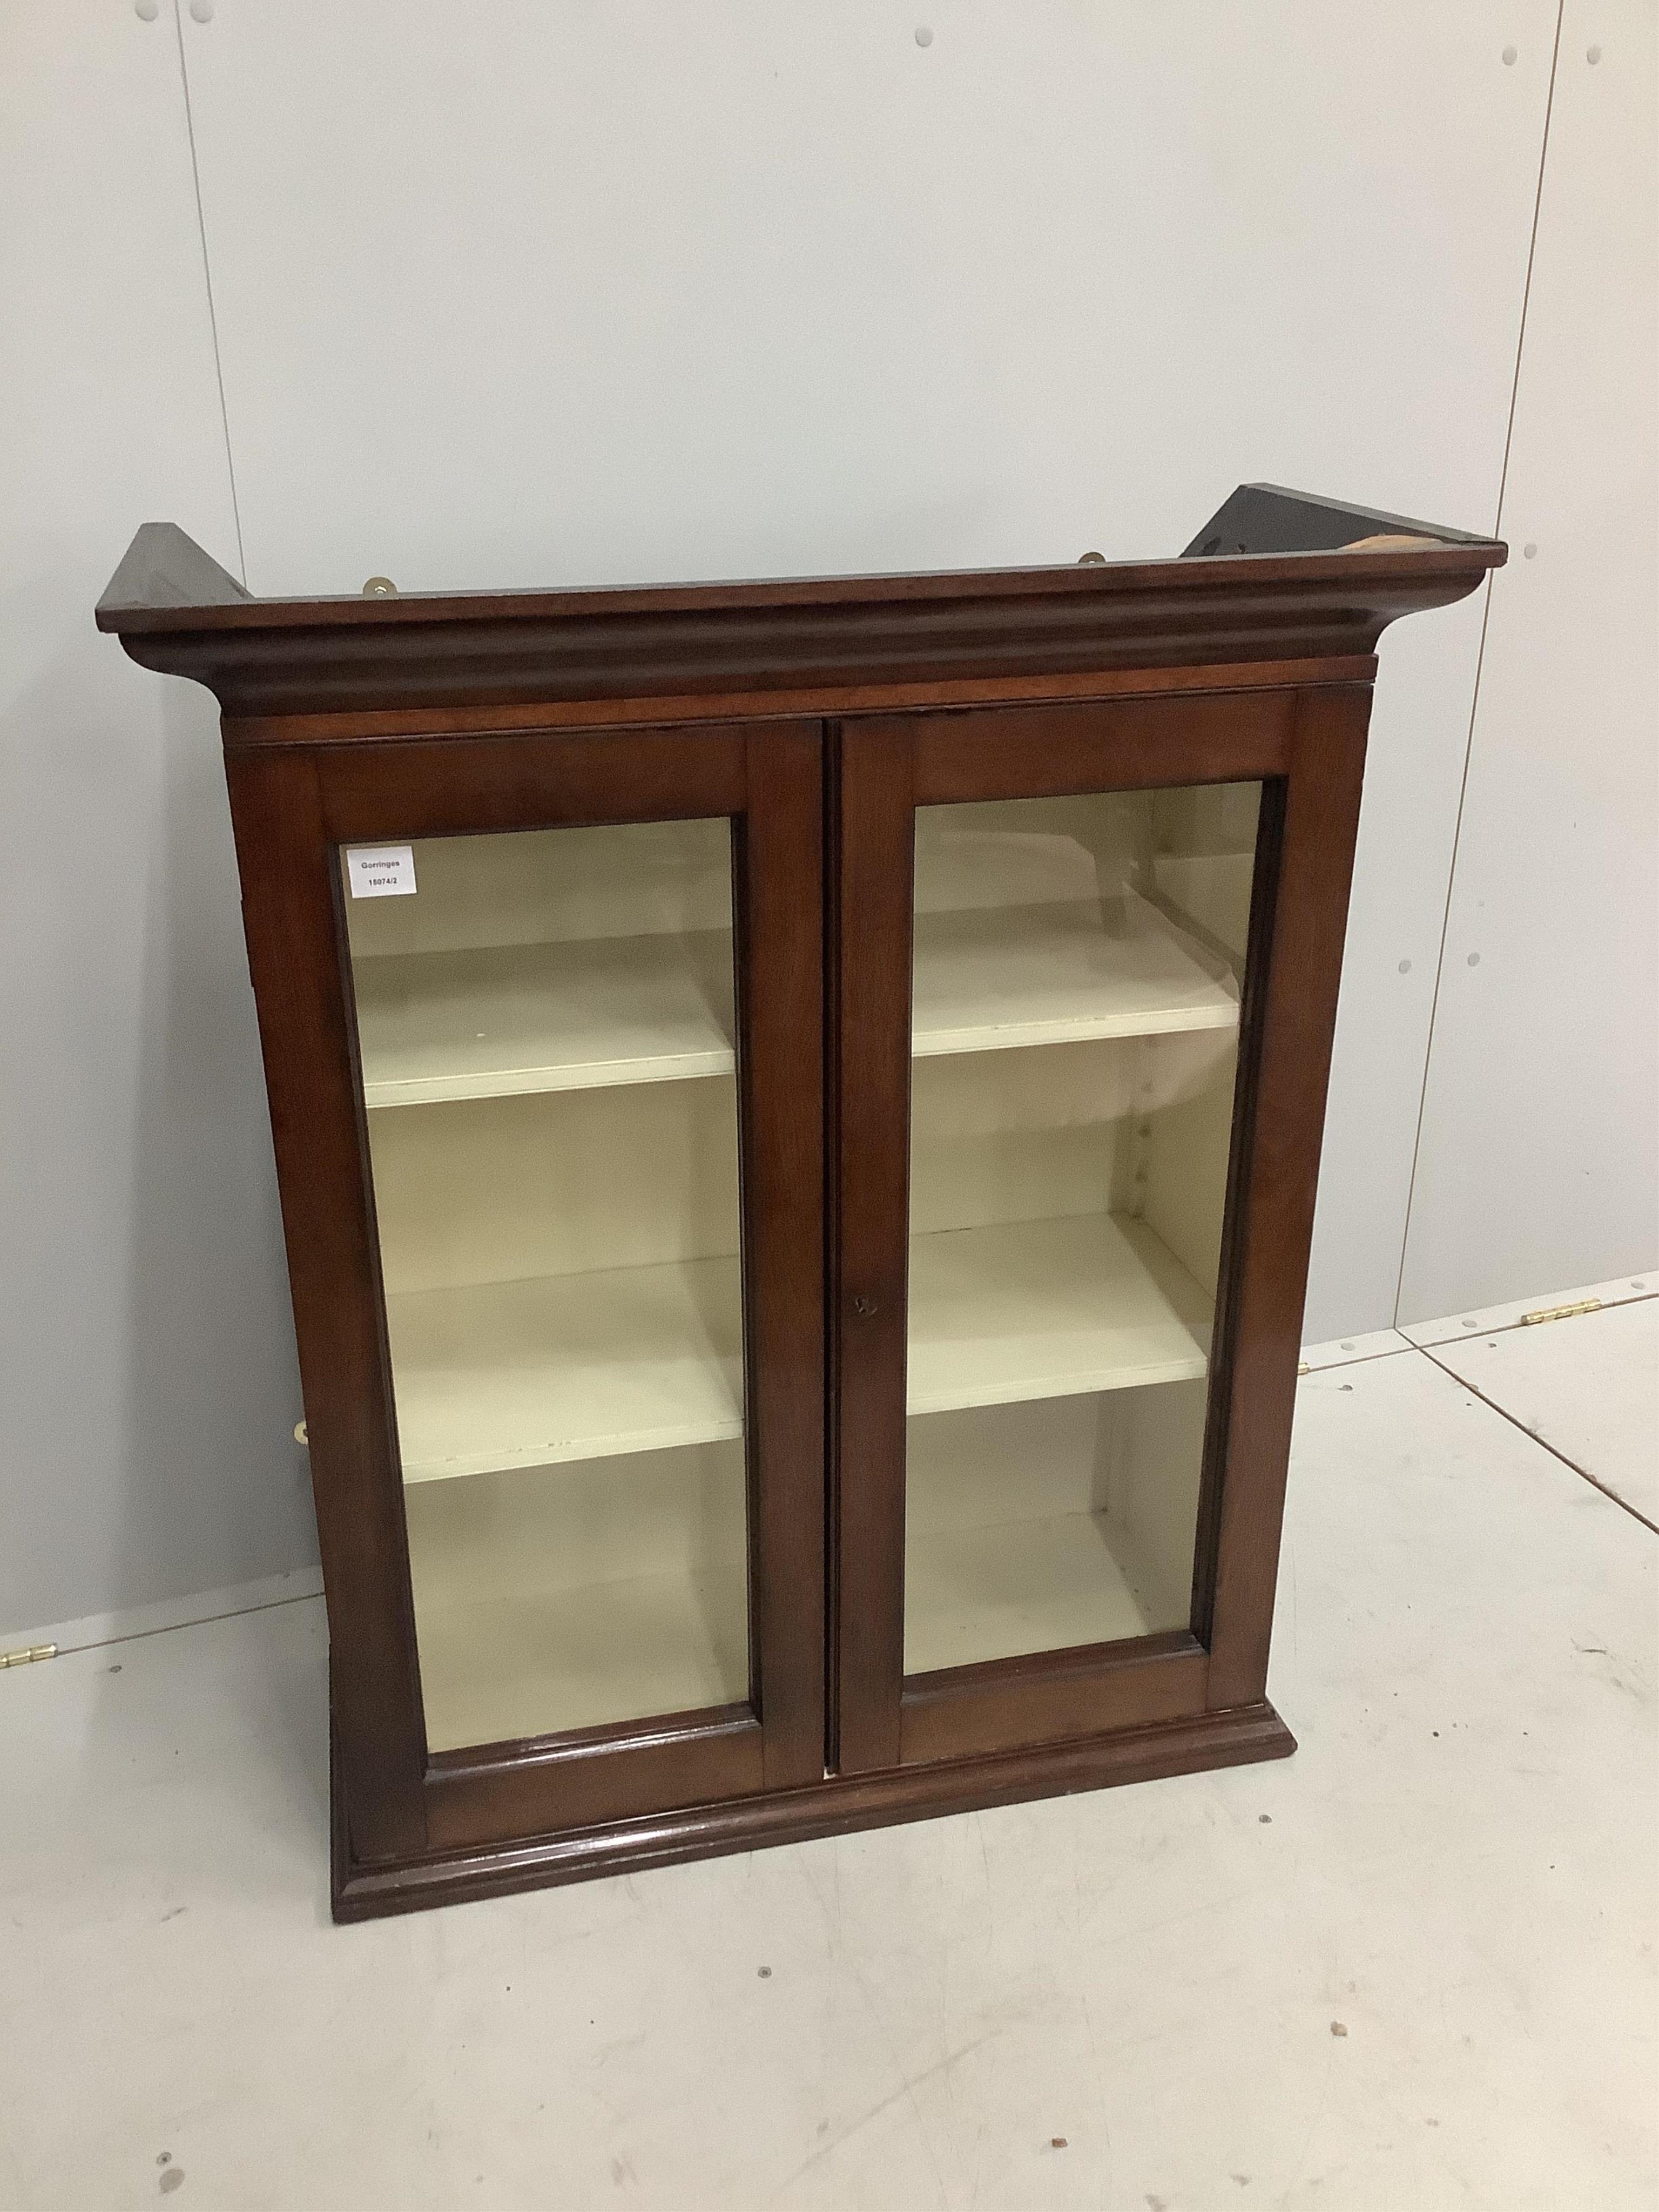 A Victorian glazed mahogany two door wall cabinet, width 86cm, depth 36cm, height 101cm. Condition - good